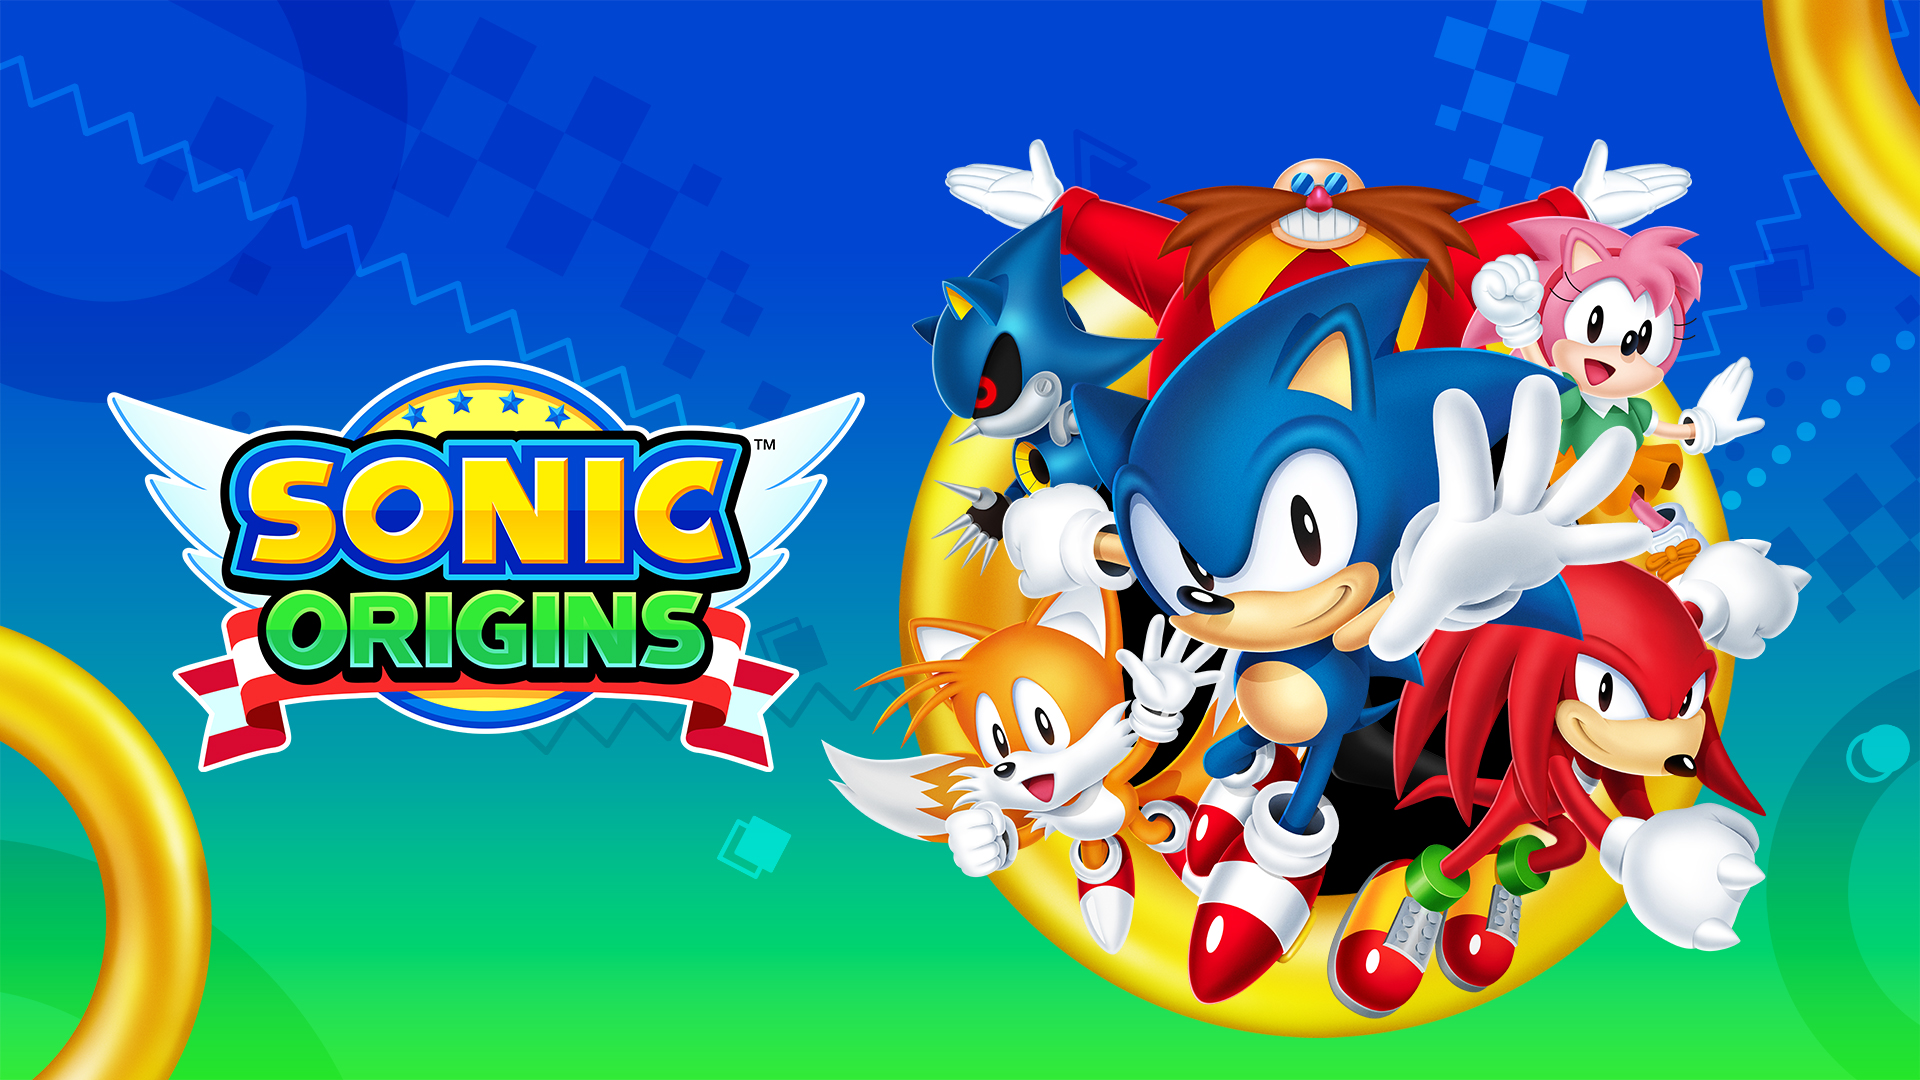 Sonic Origins brings 4 Sonic the Hedgehog games to console & PC in June